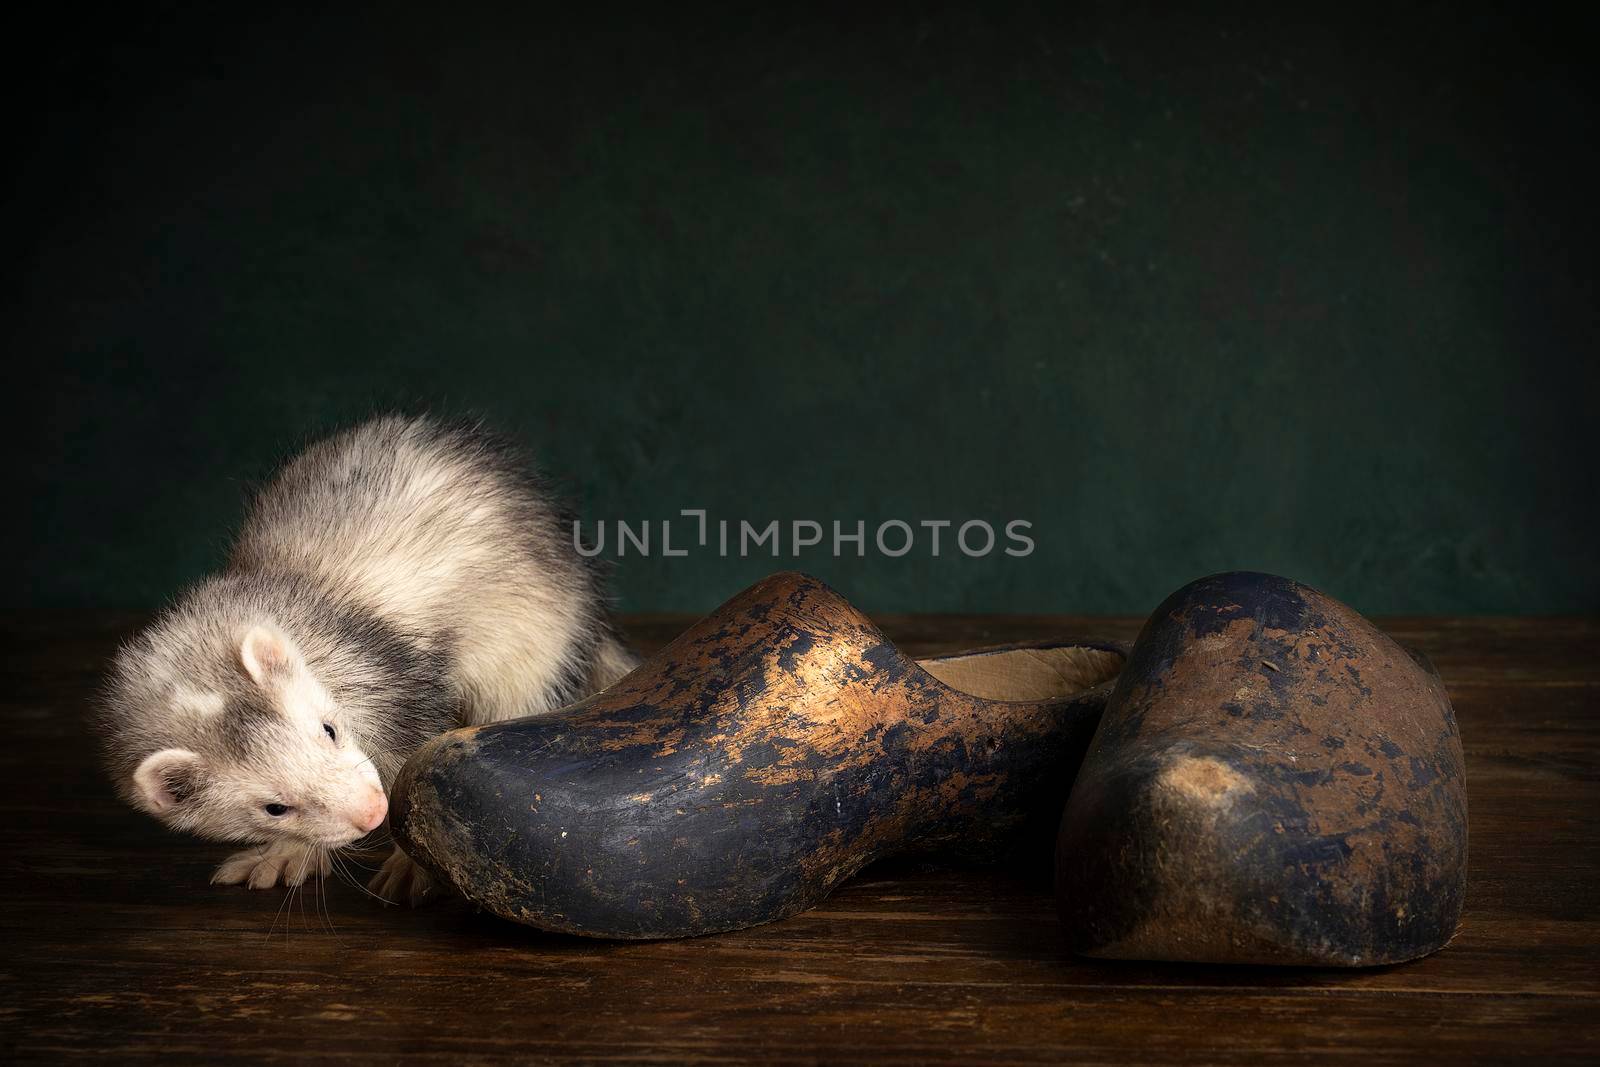 Young ferret or polecat puppy in a stillife scene with clogs or wooden shoes which are typical for The Netherlands against a green background